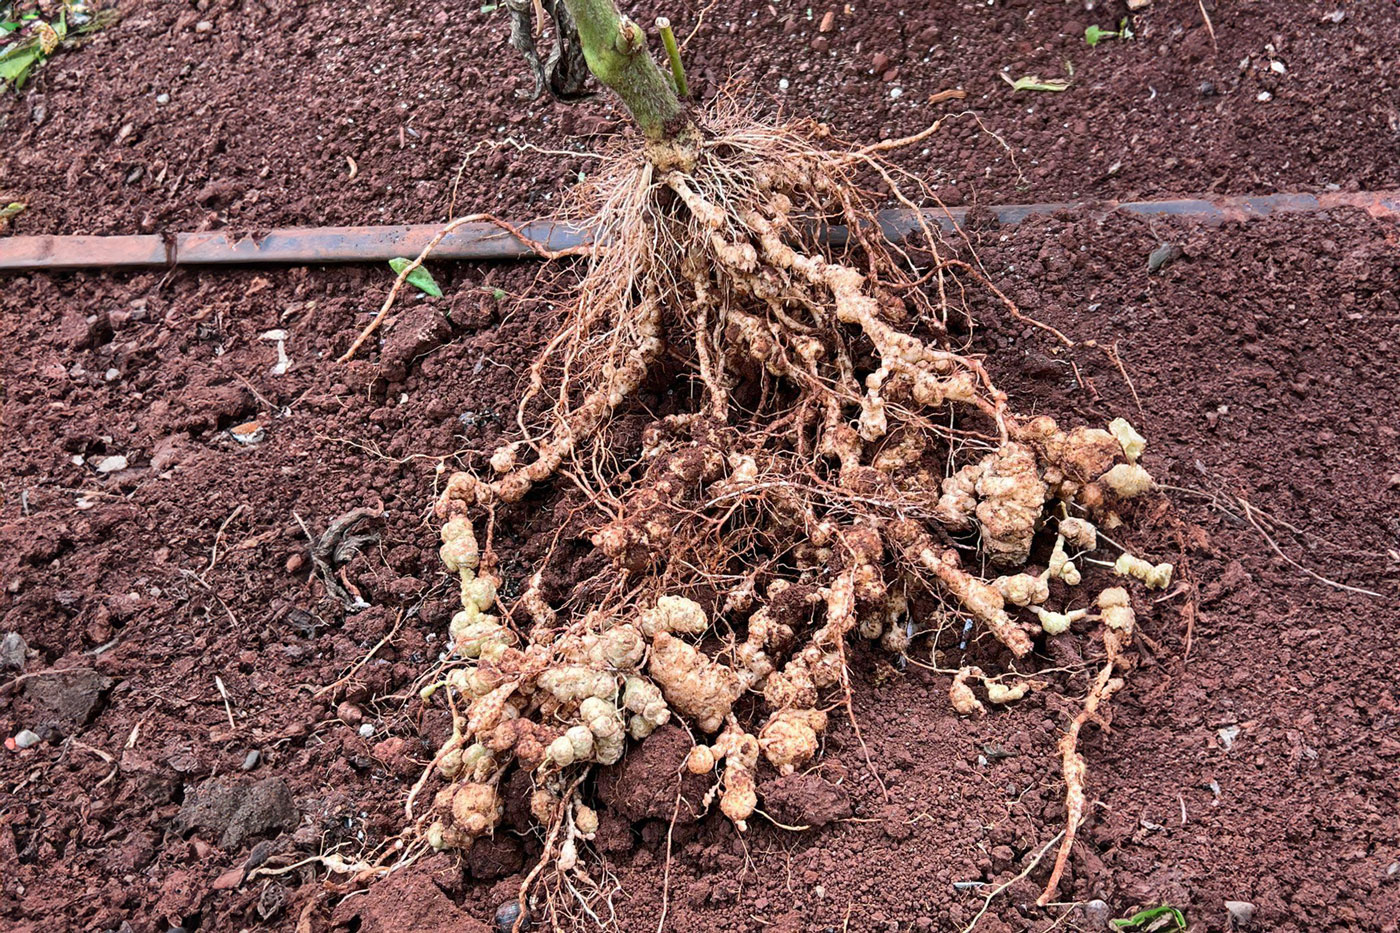 tomato roots with light colored growths